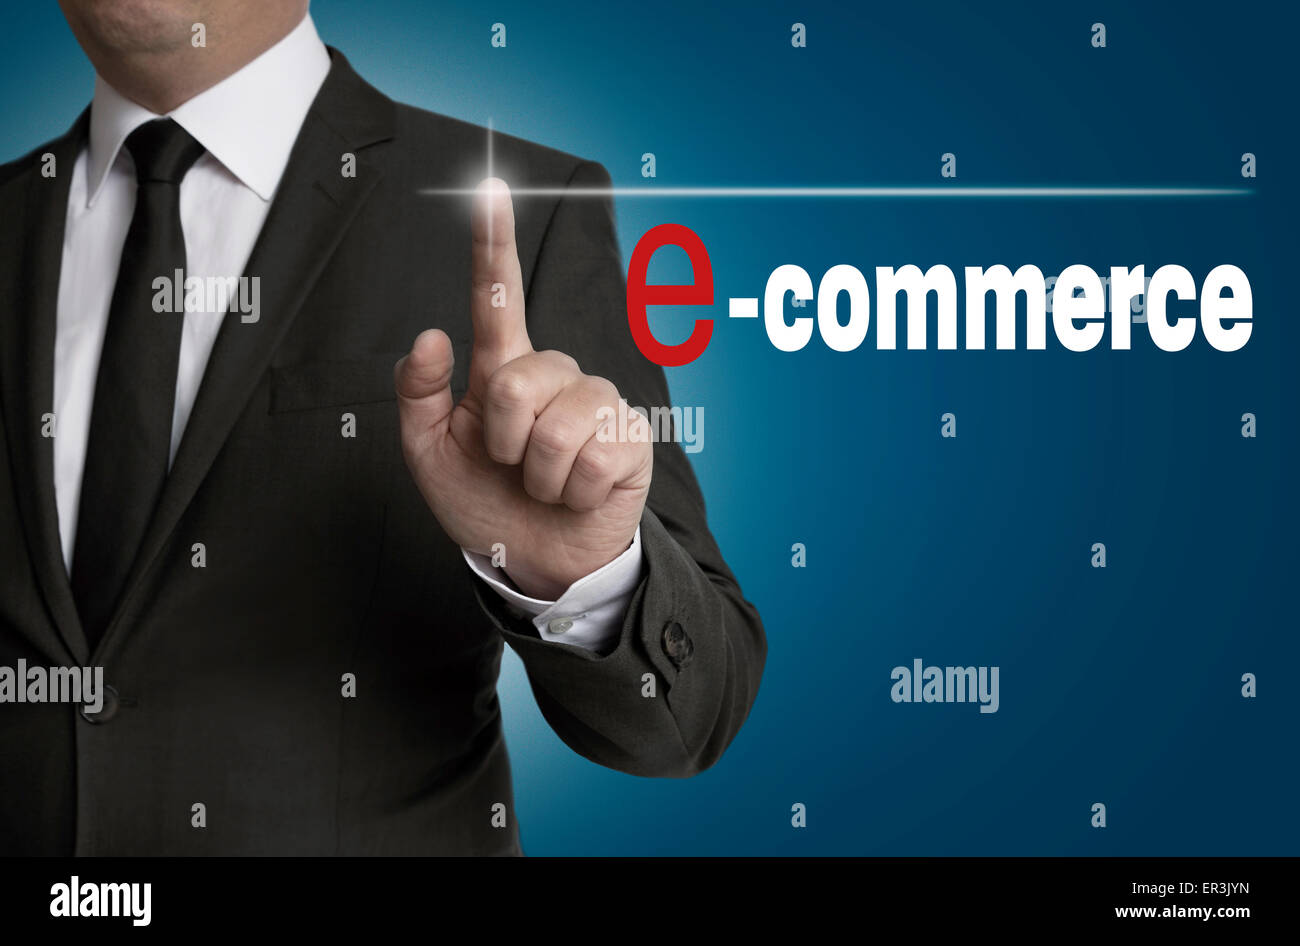 e commerce touchscreen is operated by businessman. Stock Photo